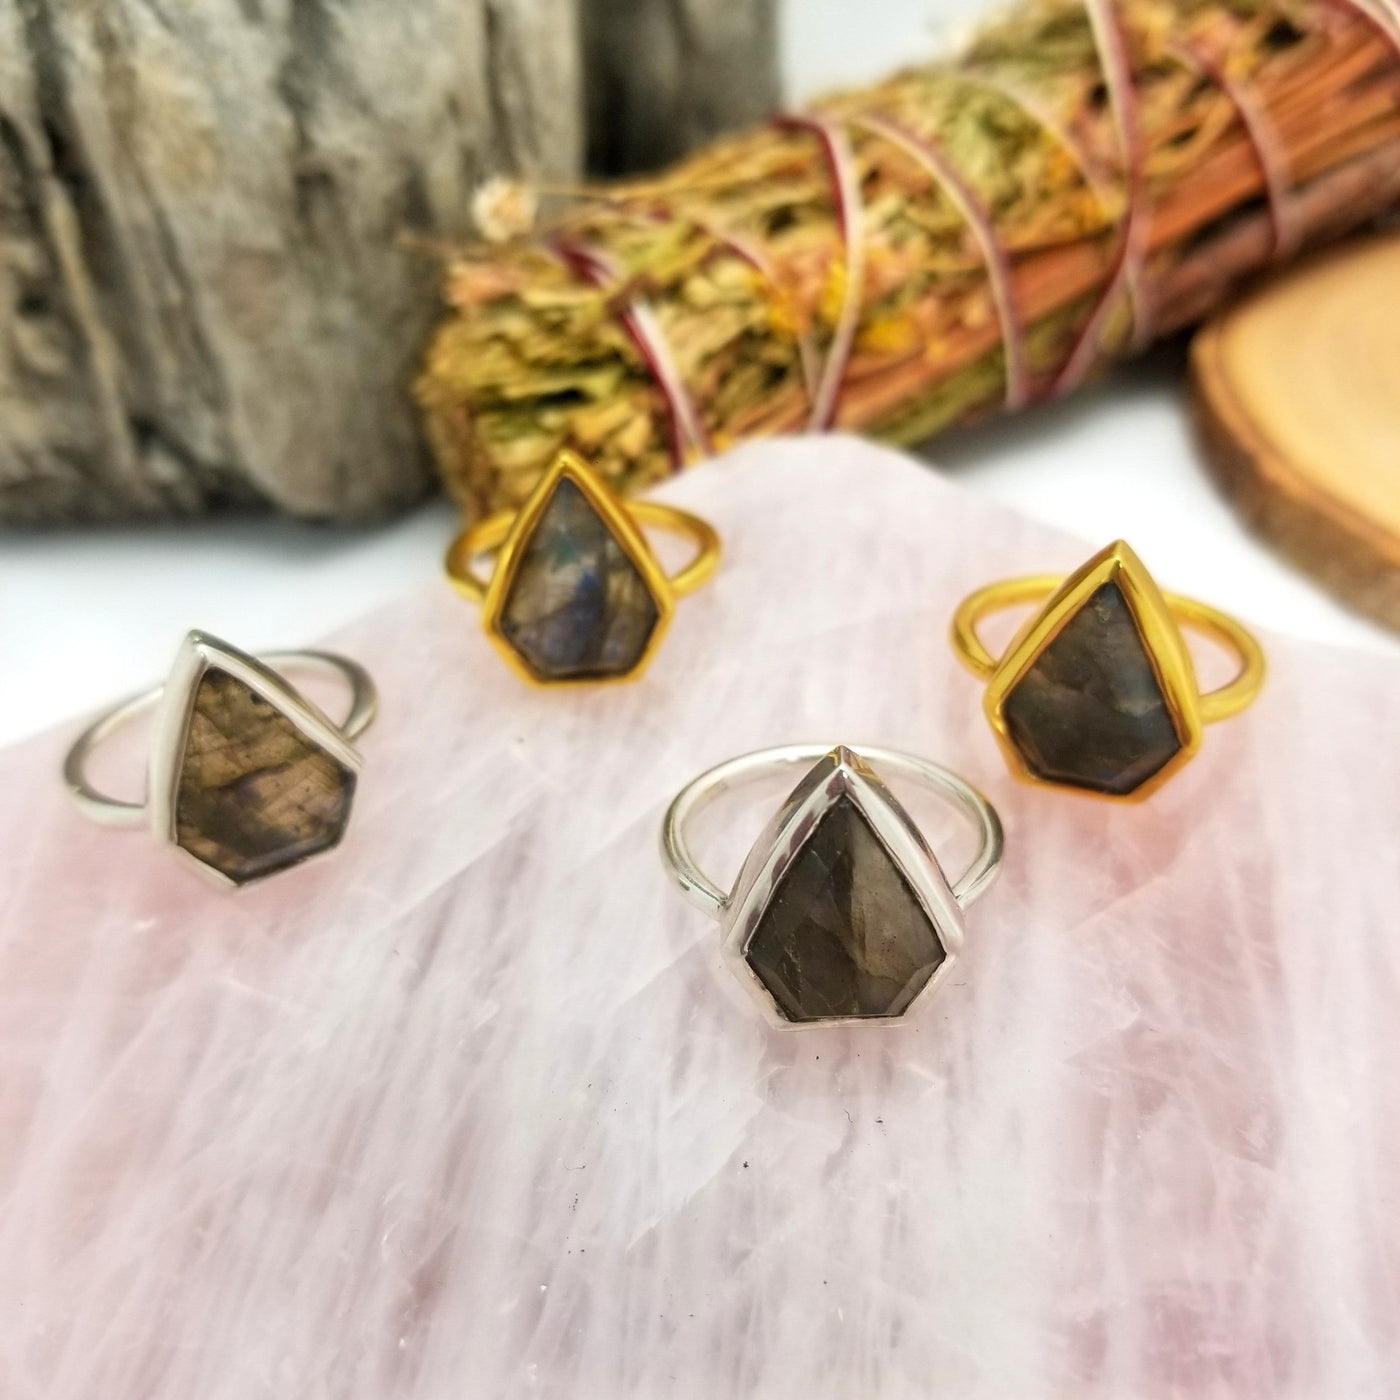 4 labradorite arrowhead rings in gold and silver with decorations is the background